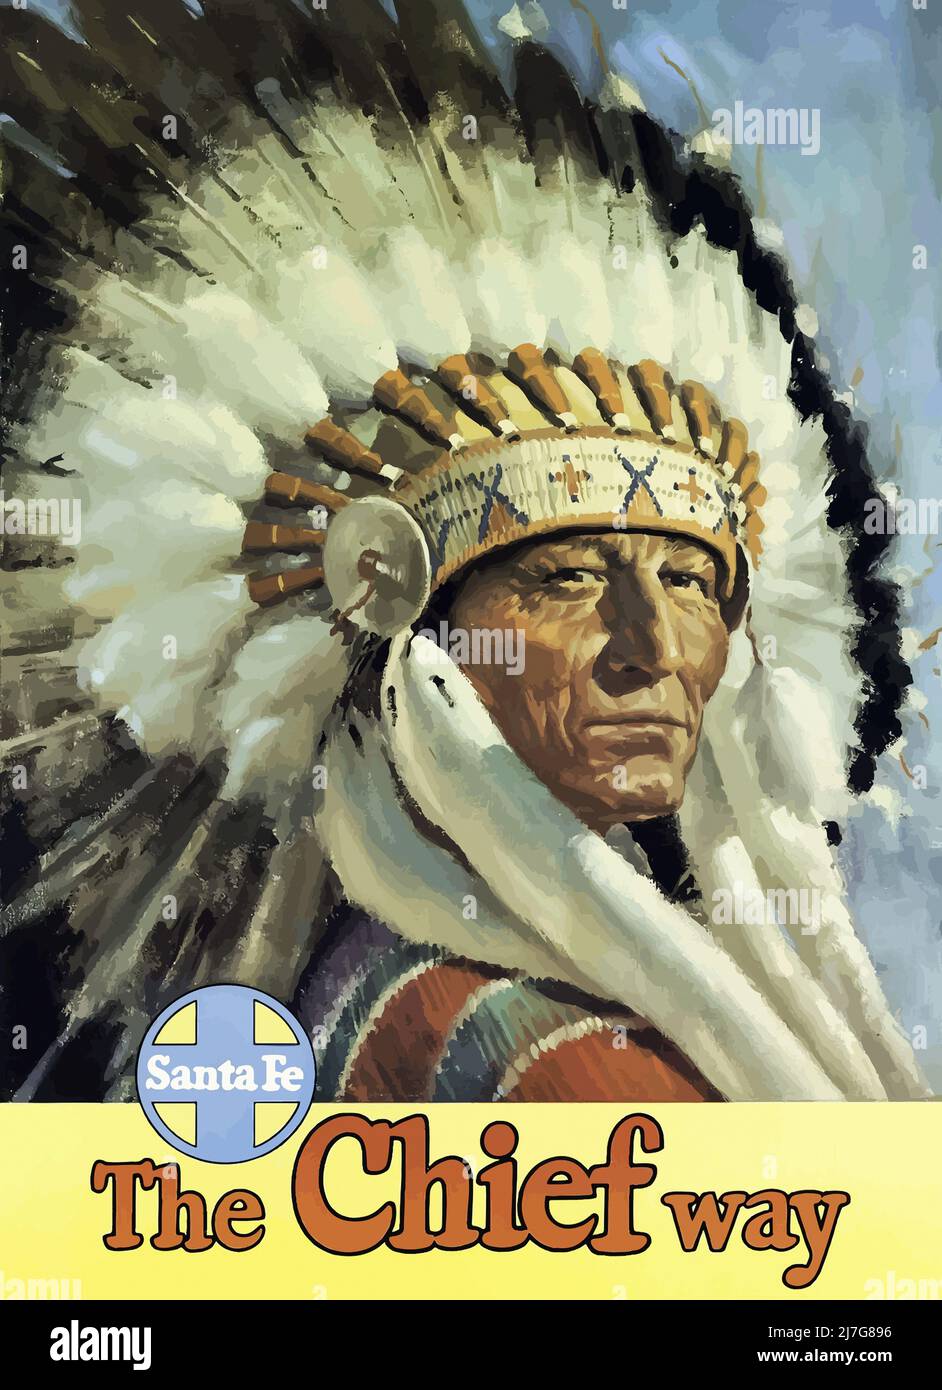 Vintage 1940s Railway Travel Poster - The Chief Way’ 1947 Sante Fe Railroad Travel Poster Native American wearing headdress. Foto Stock